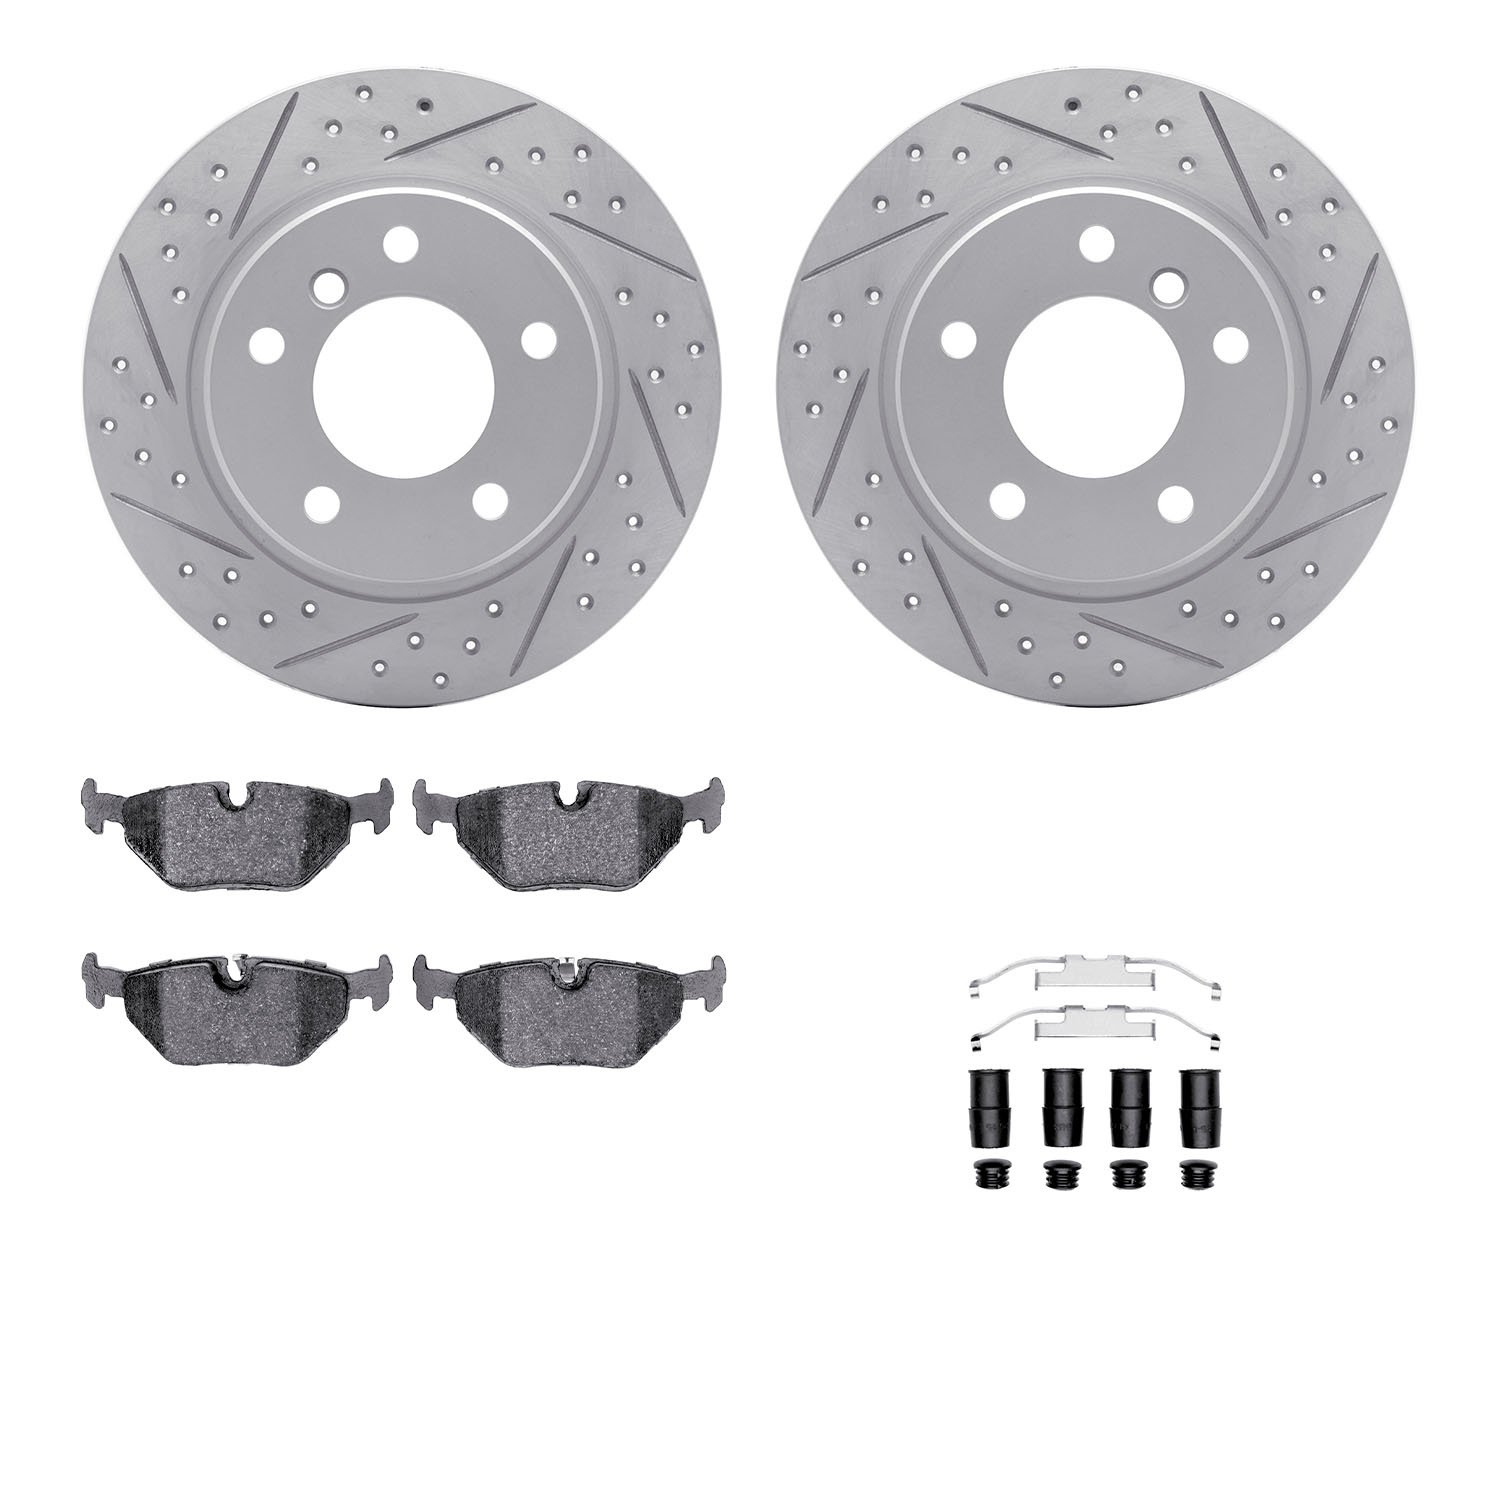 2512-31155 Geoperformance Drilled/Slotted Rotors w/5000 Advanced Brake Pads Kit & Hardware, 1991-1999 BMW, Position: Rear